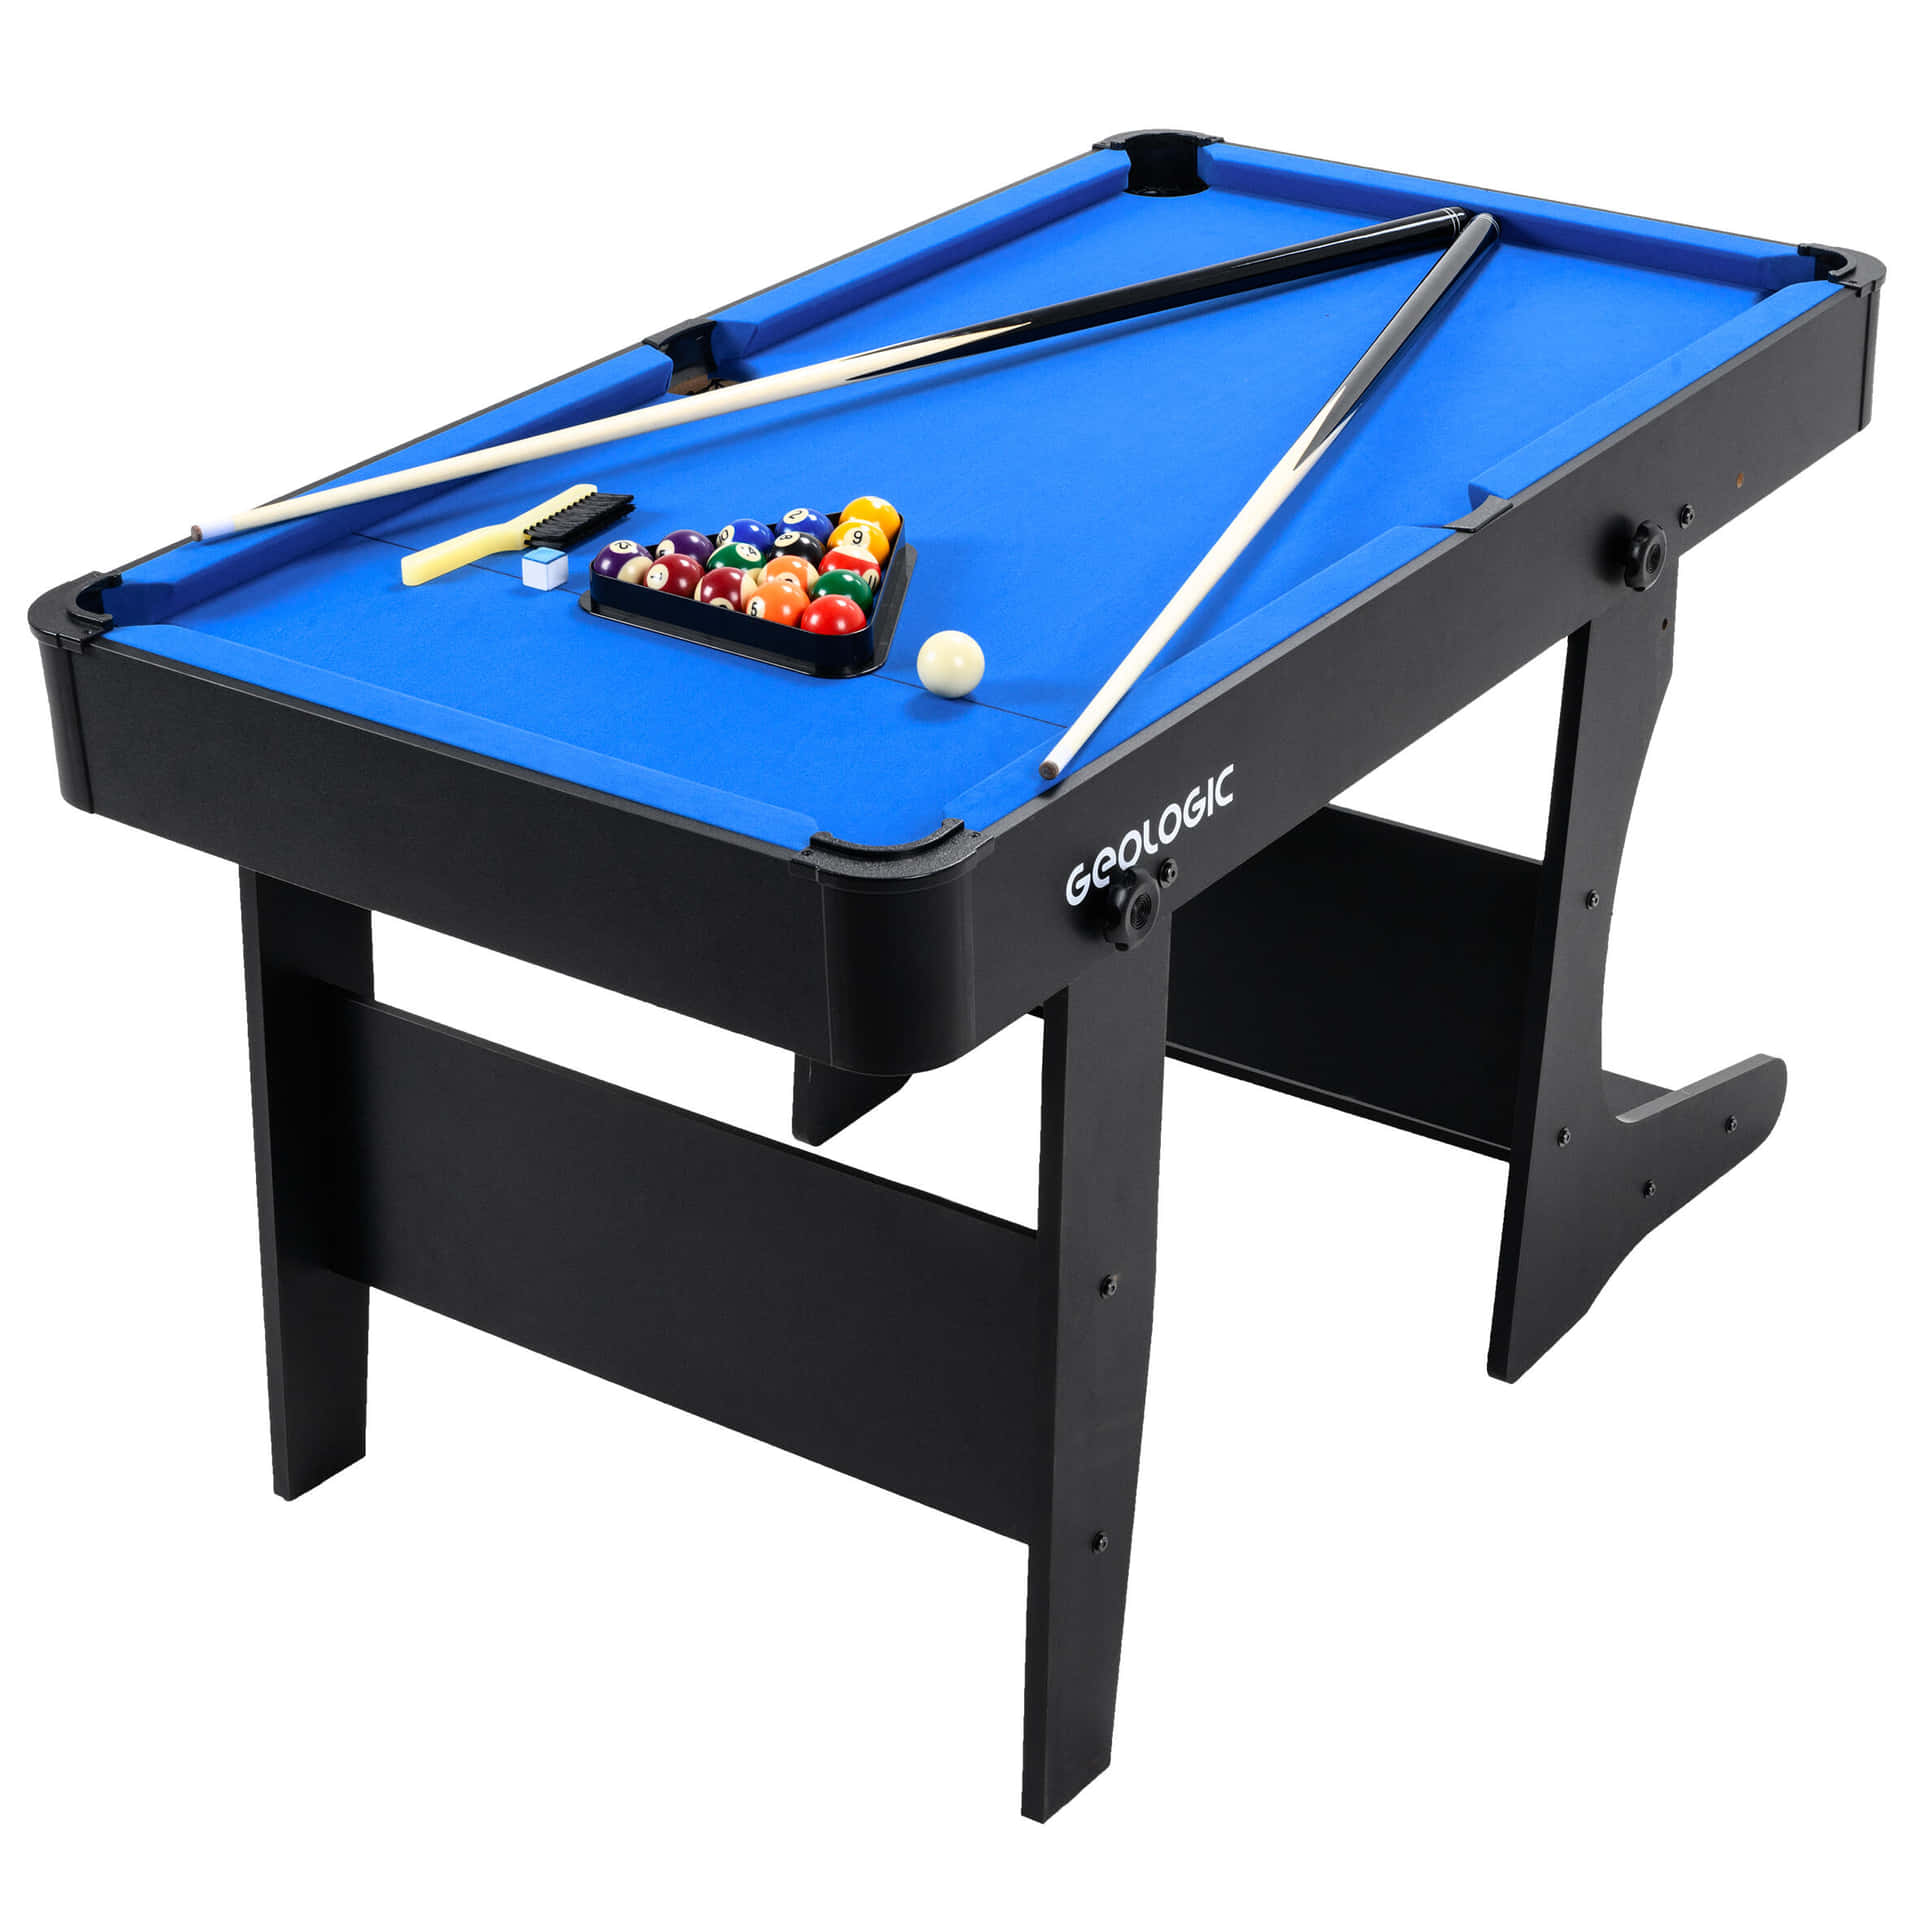 A classic pool table ready for a match.